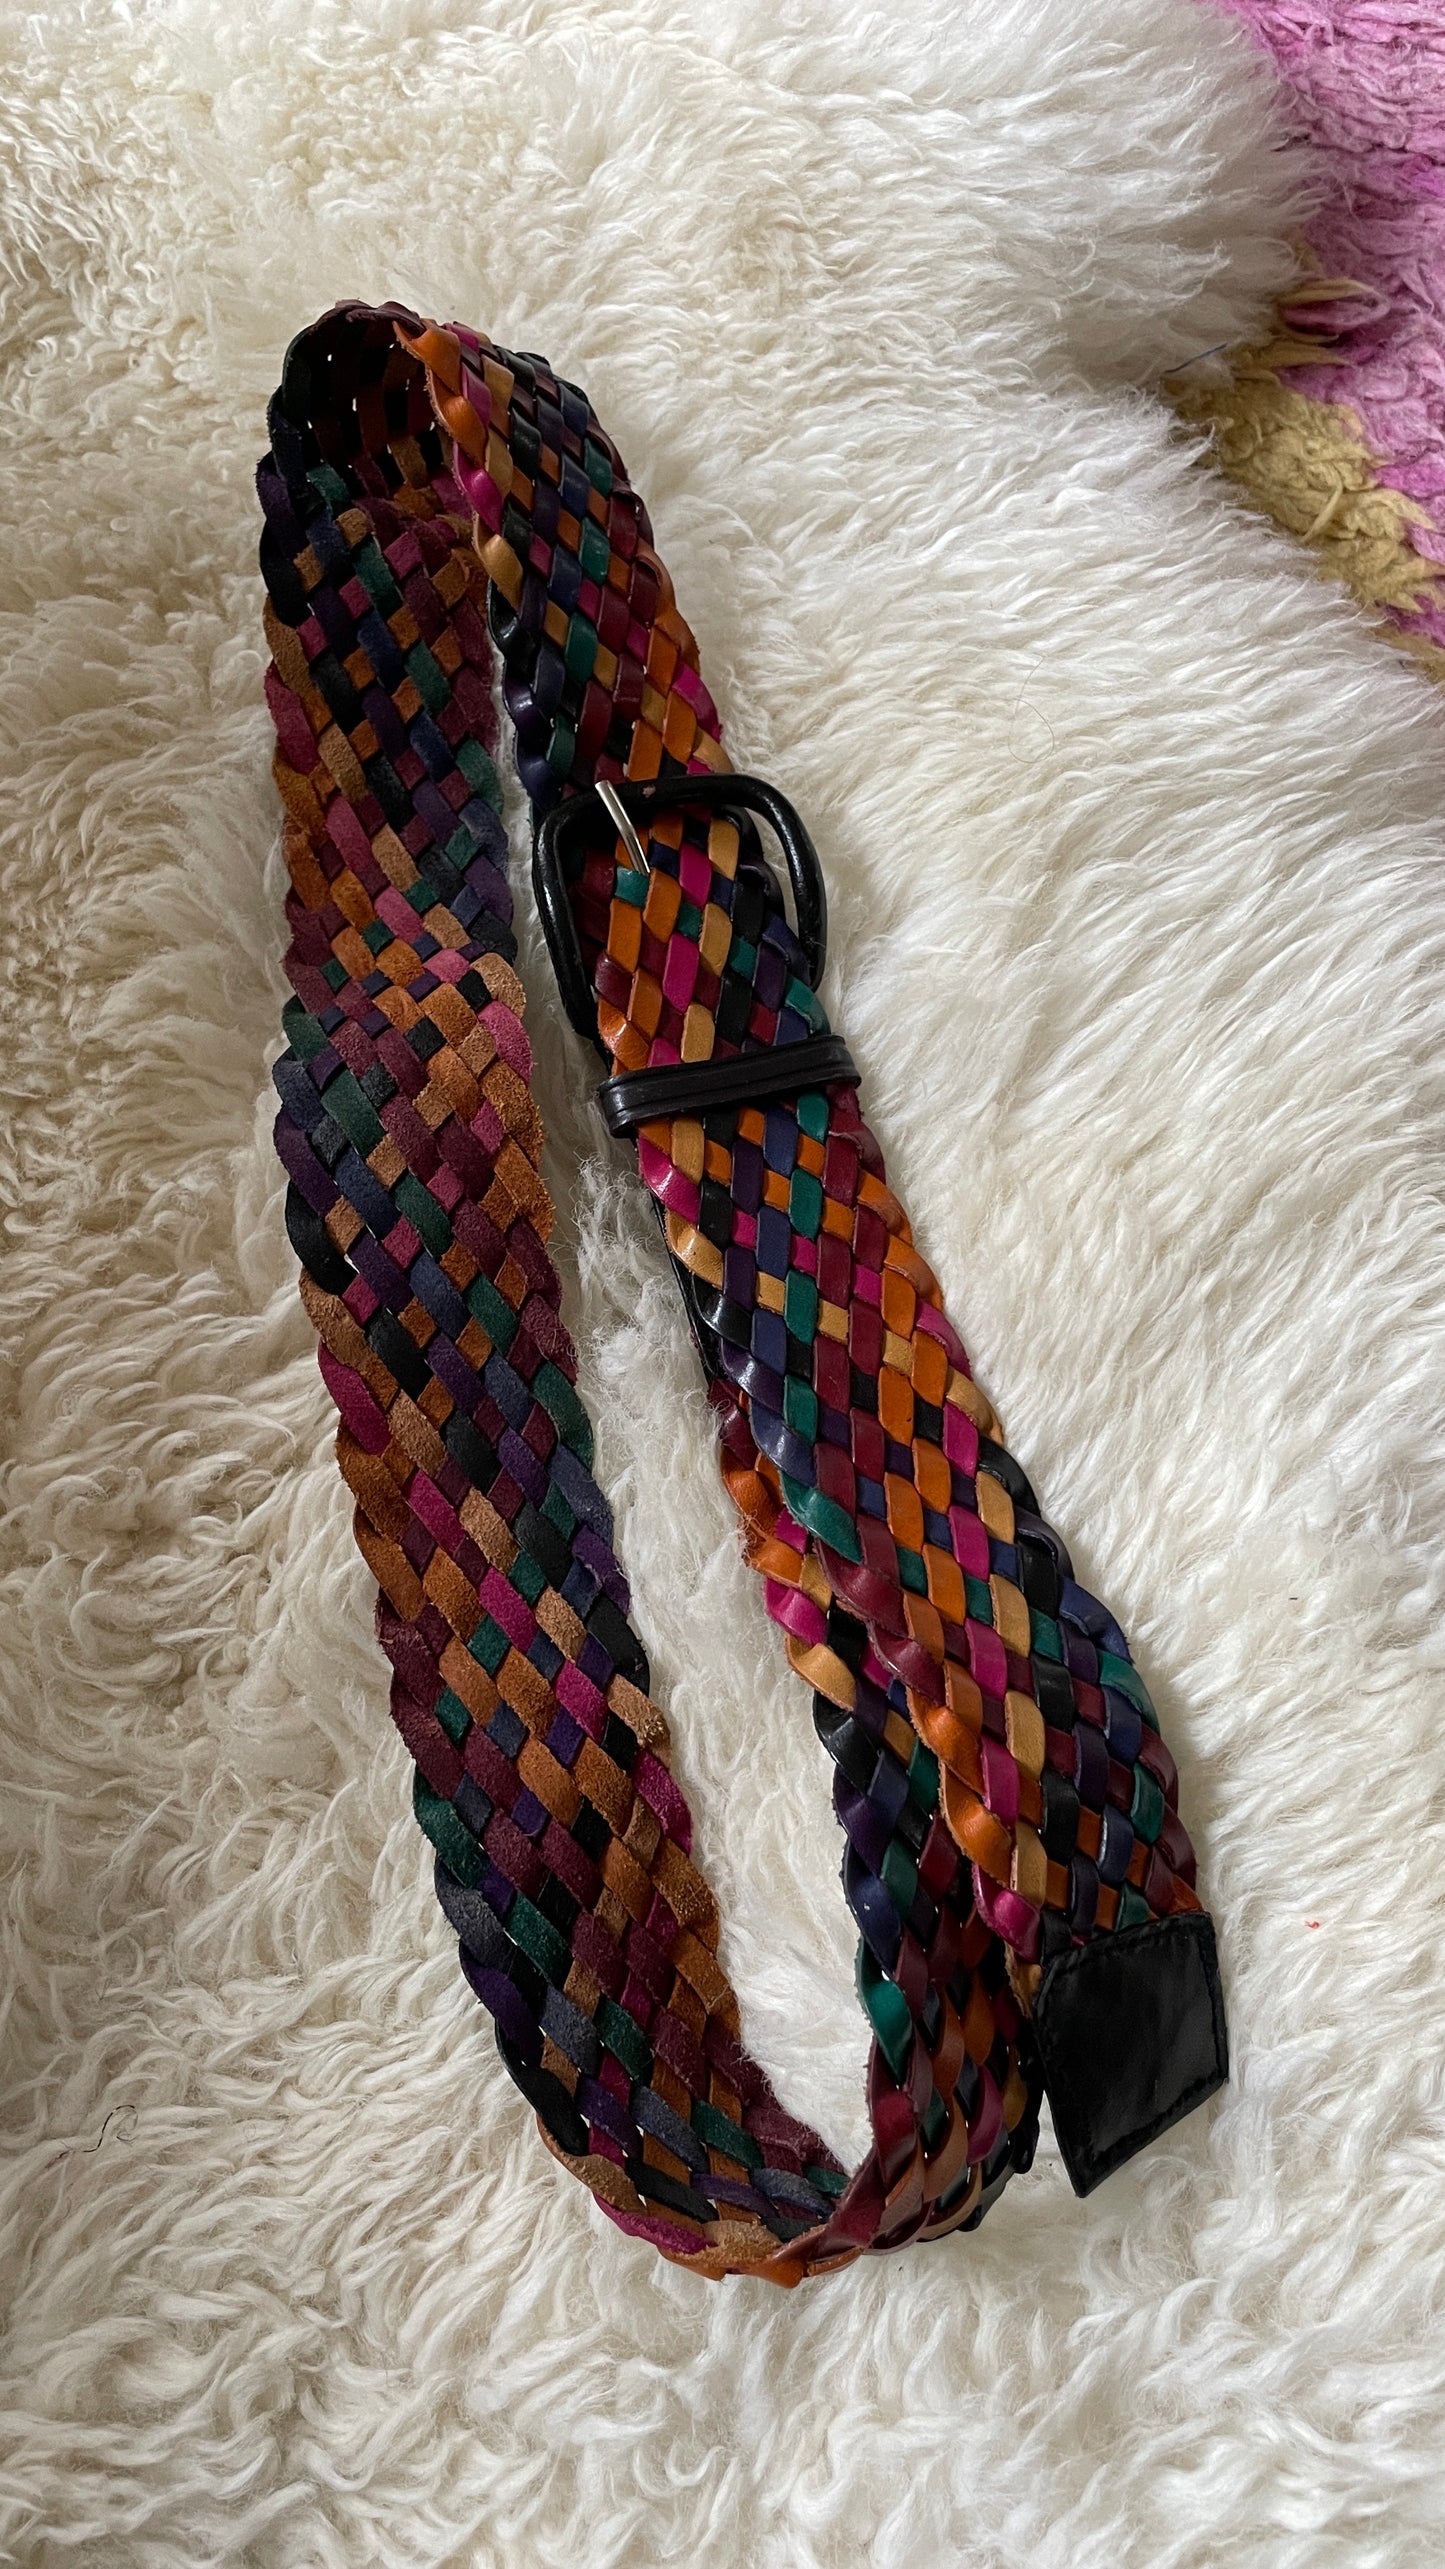 Colorful woven belt